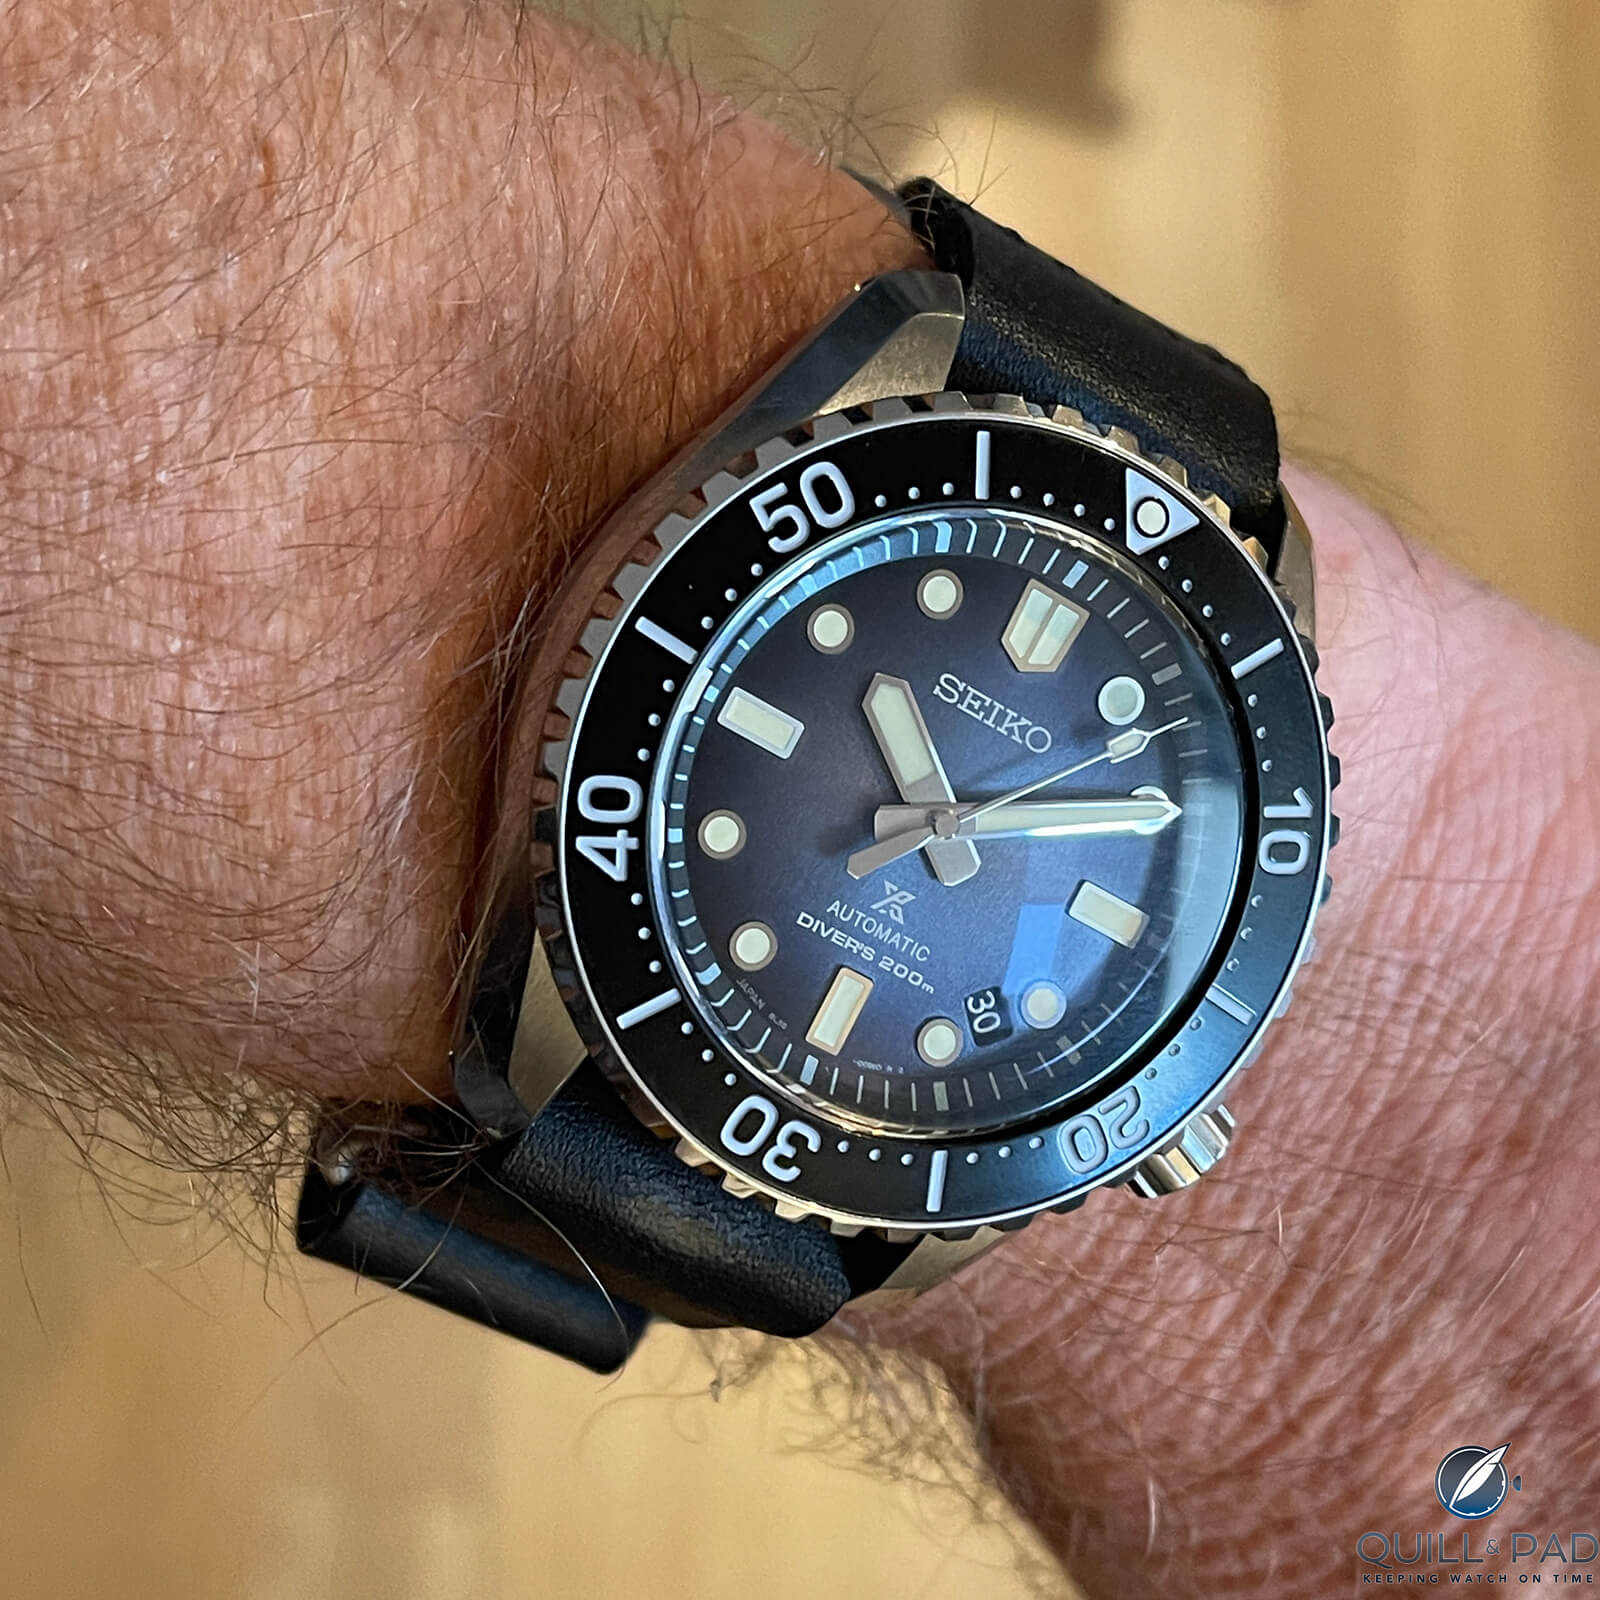 Real-World Diving With The Seiko Prospex The 1968 Automatic Diver's Modern  Re-Interpretation Limited Edition SLA055 - Quill & Pad